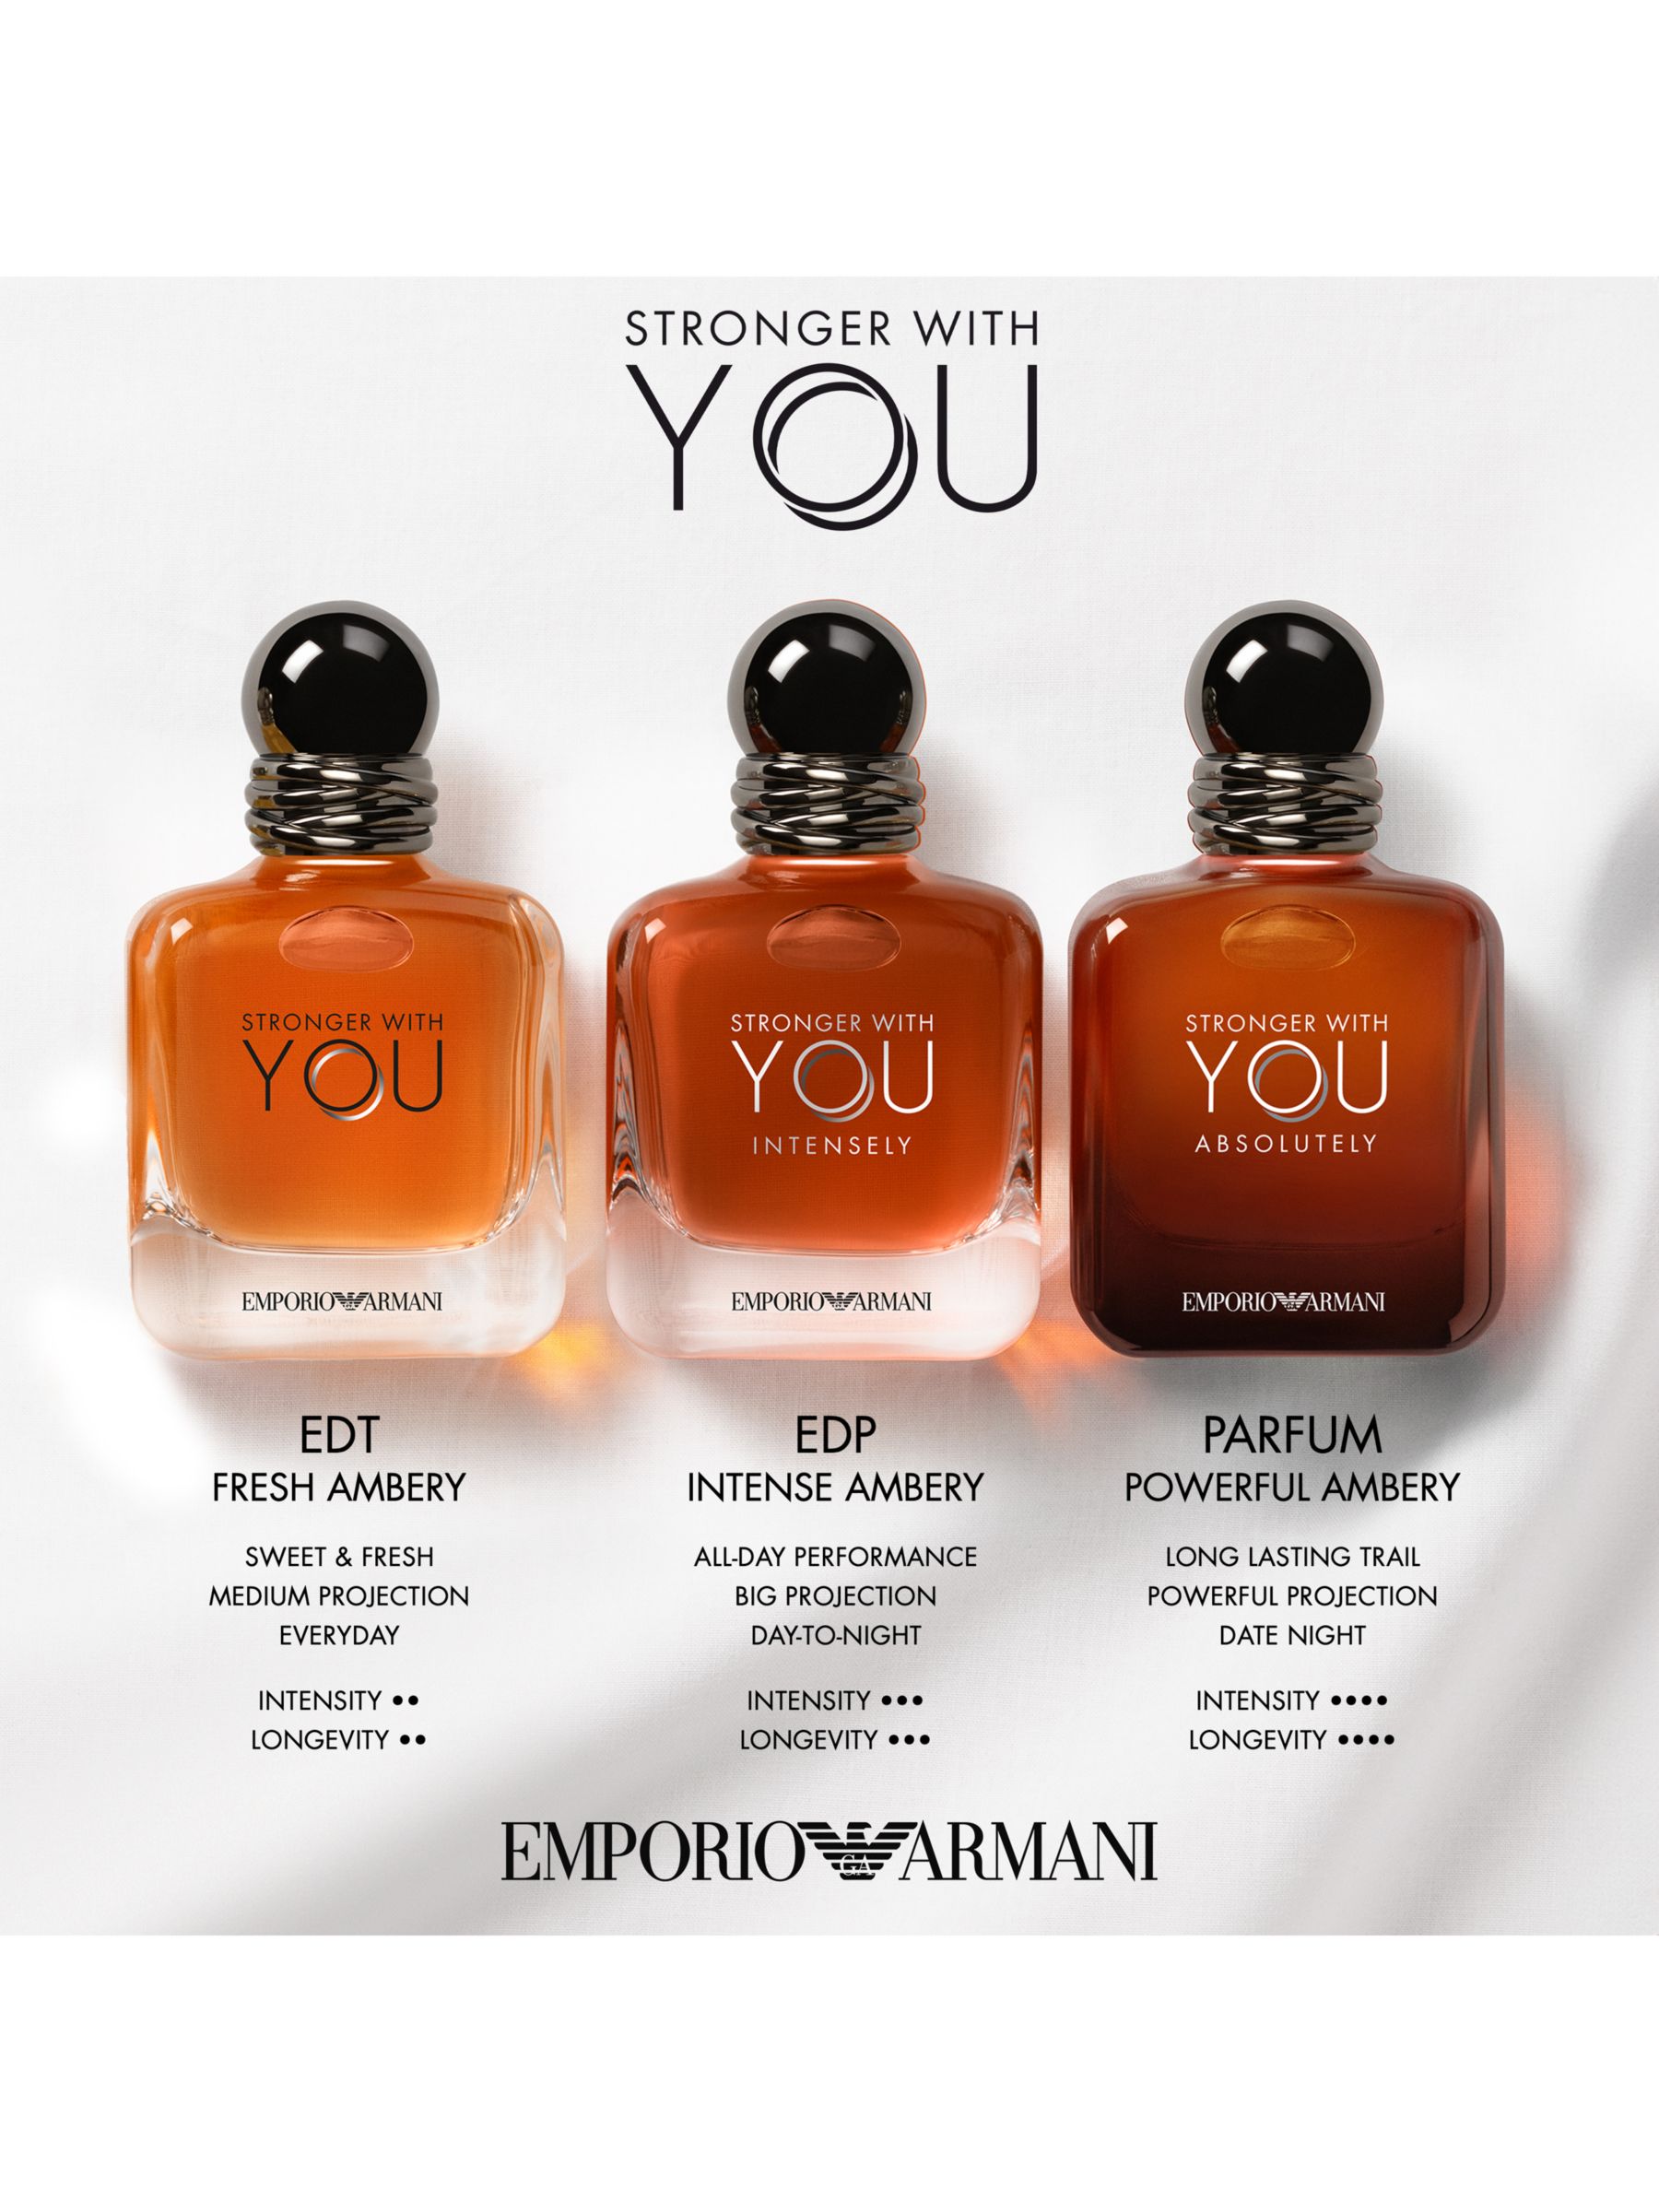 stronger with you intensely emporio armani